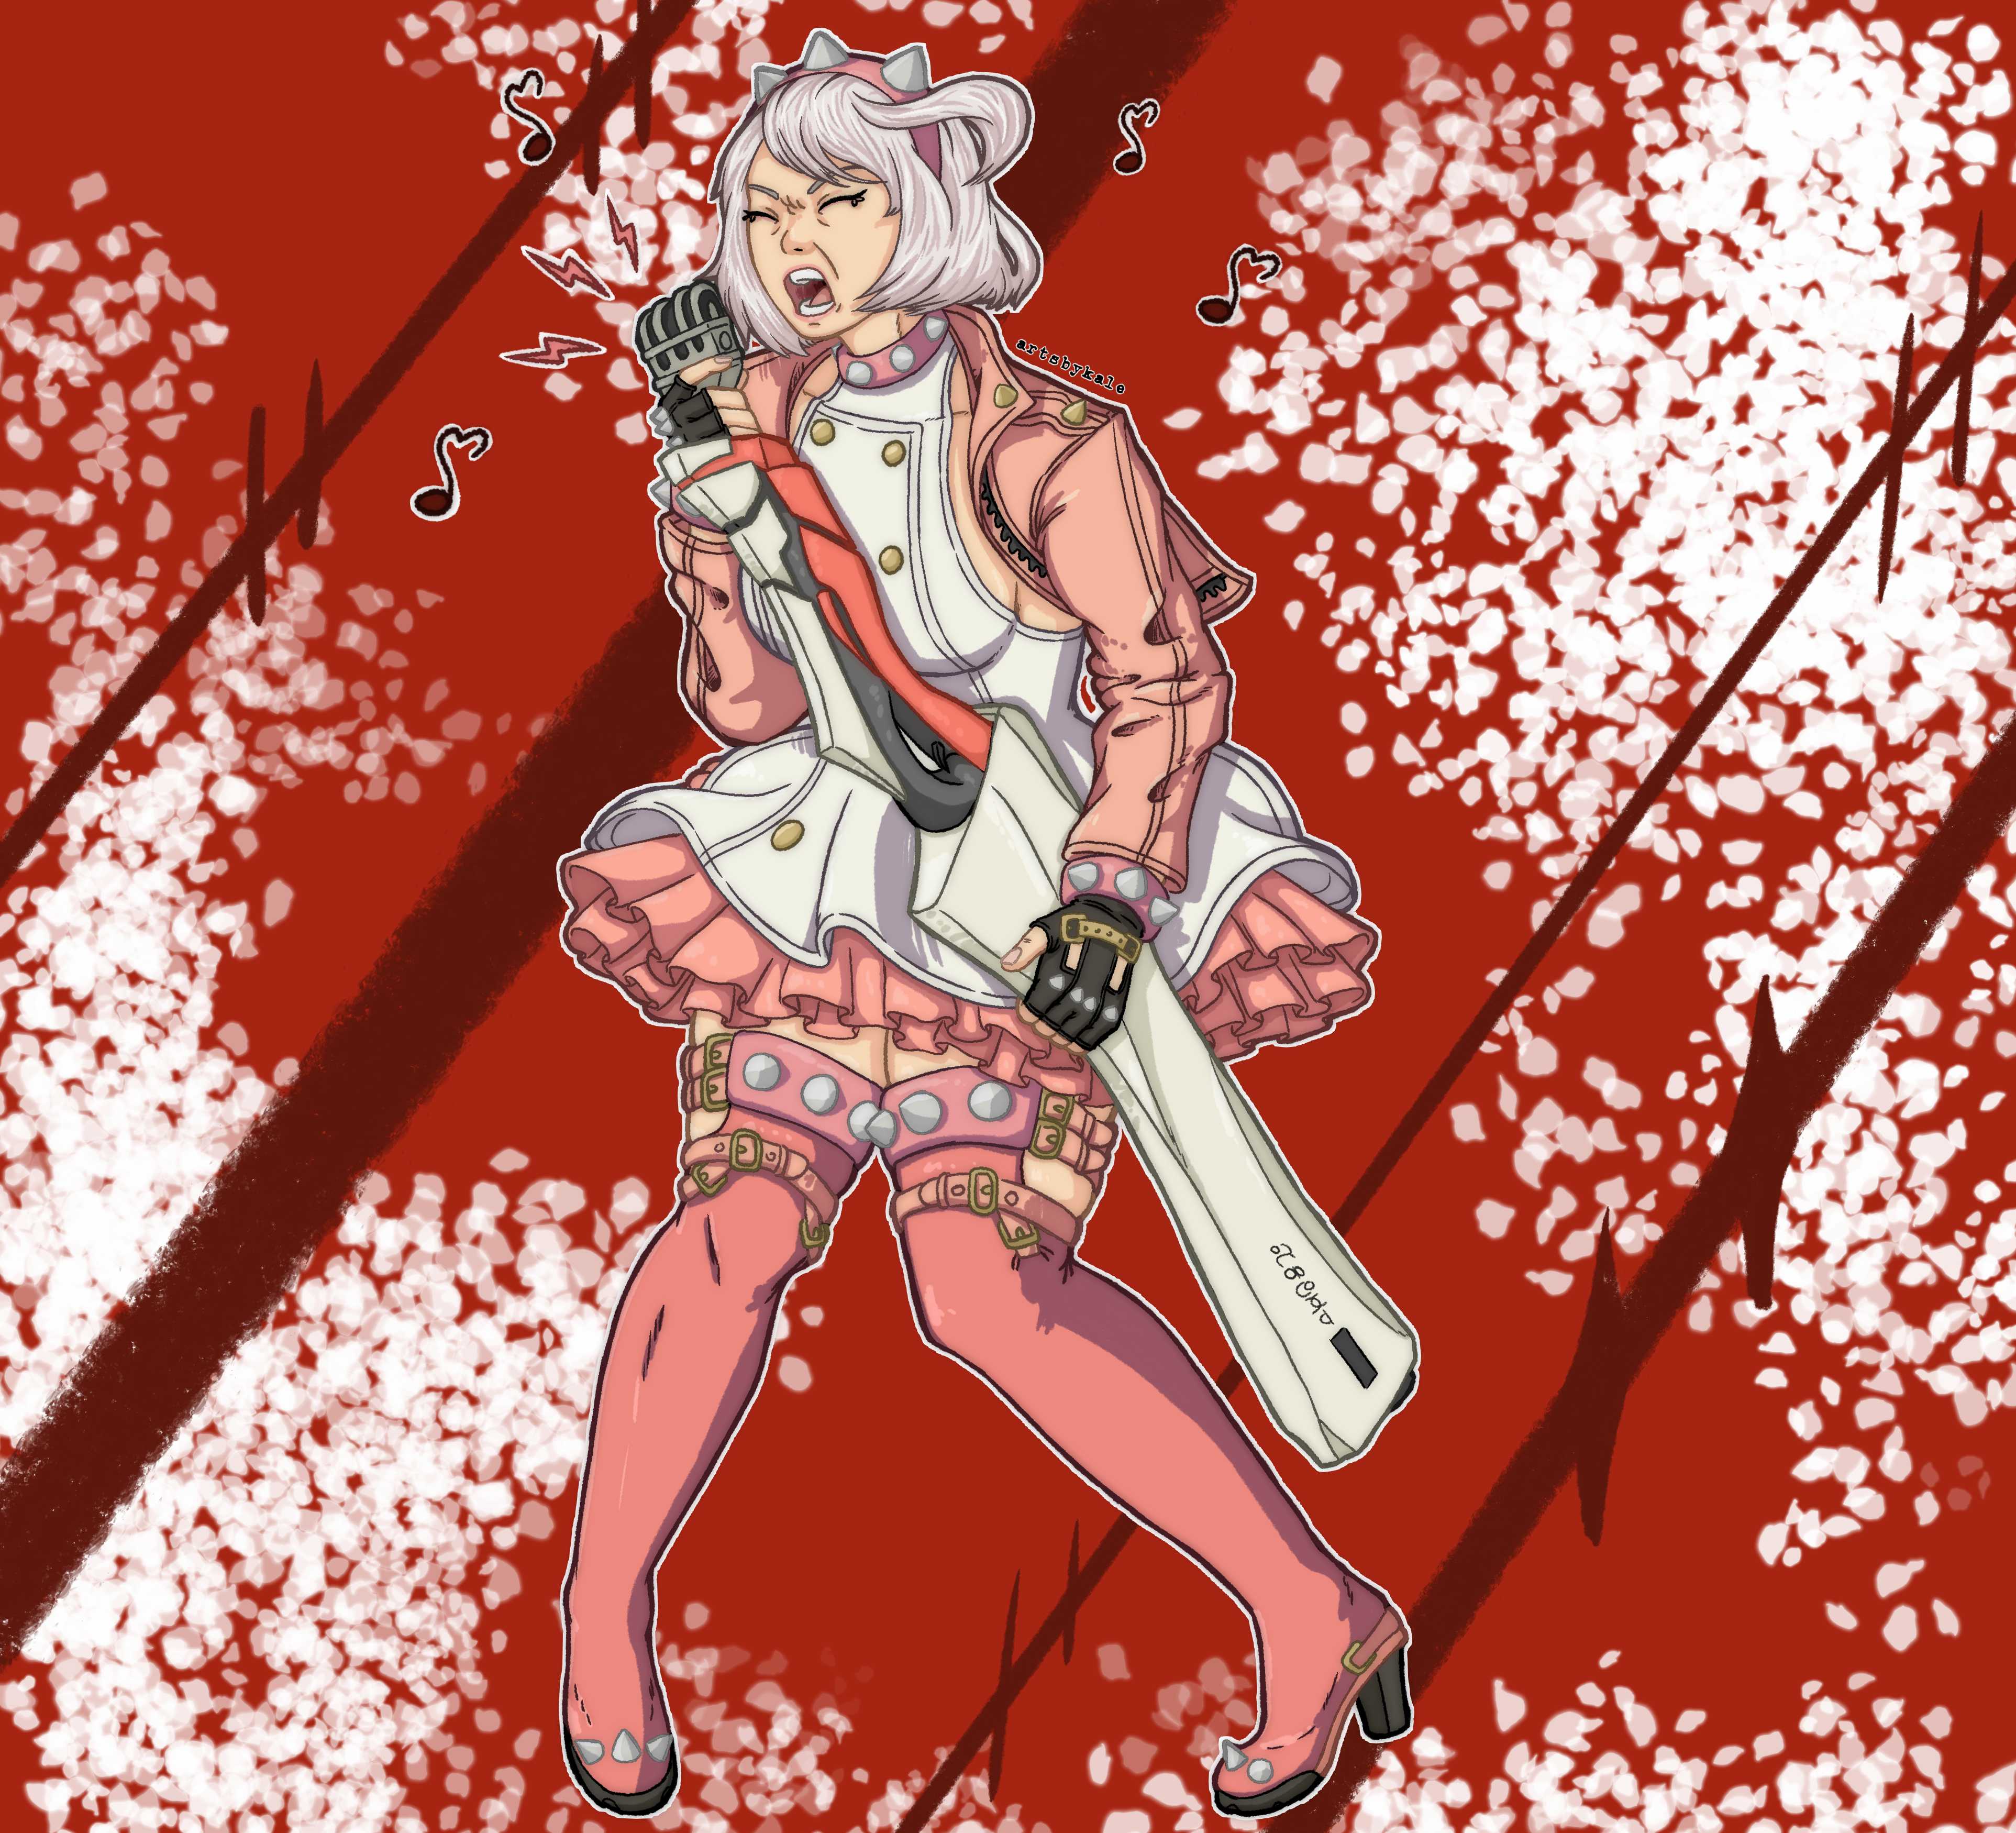 A fullbody drawing of Elphelt Valentine from Guilty Gear Strive